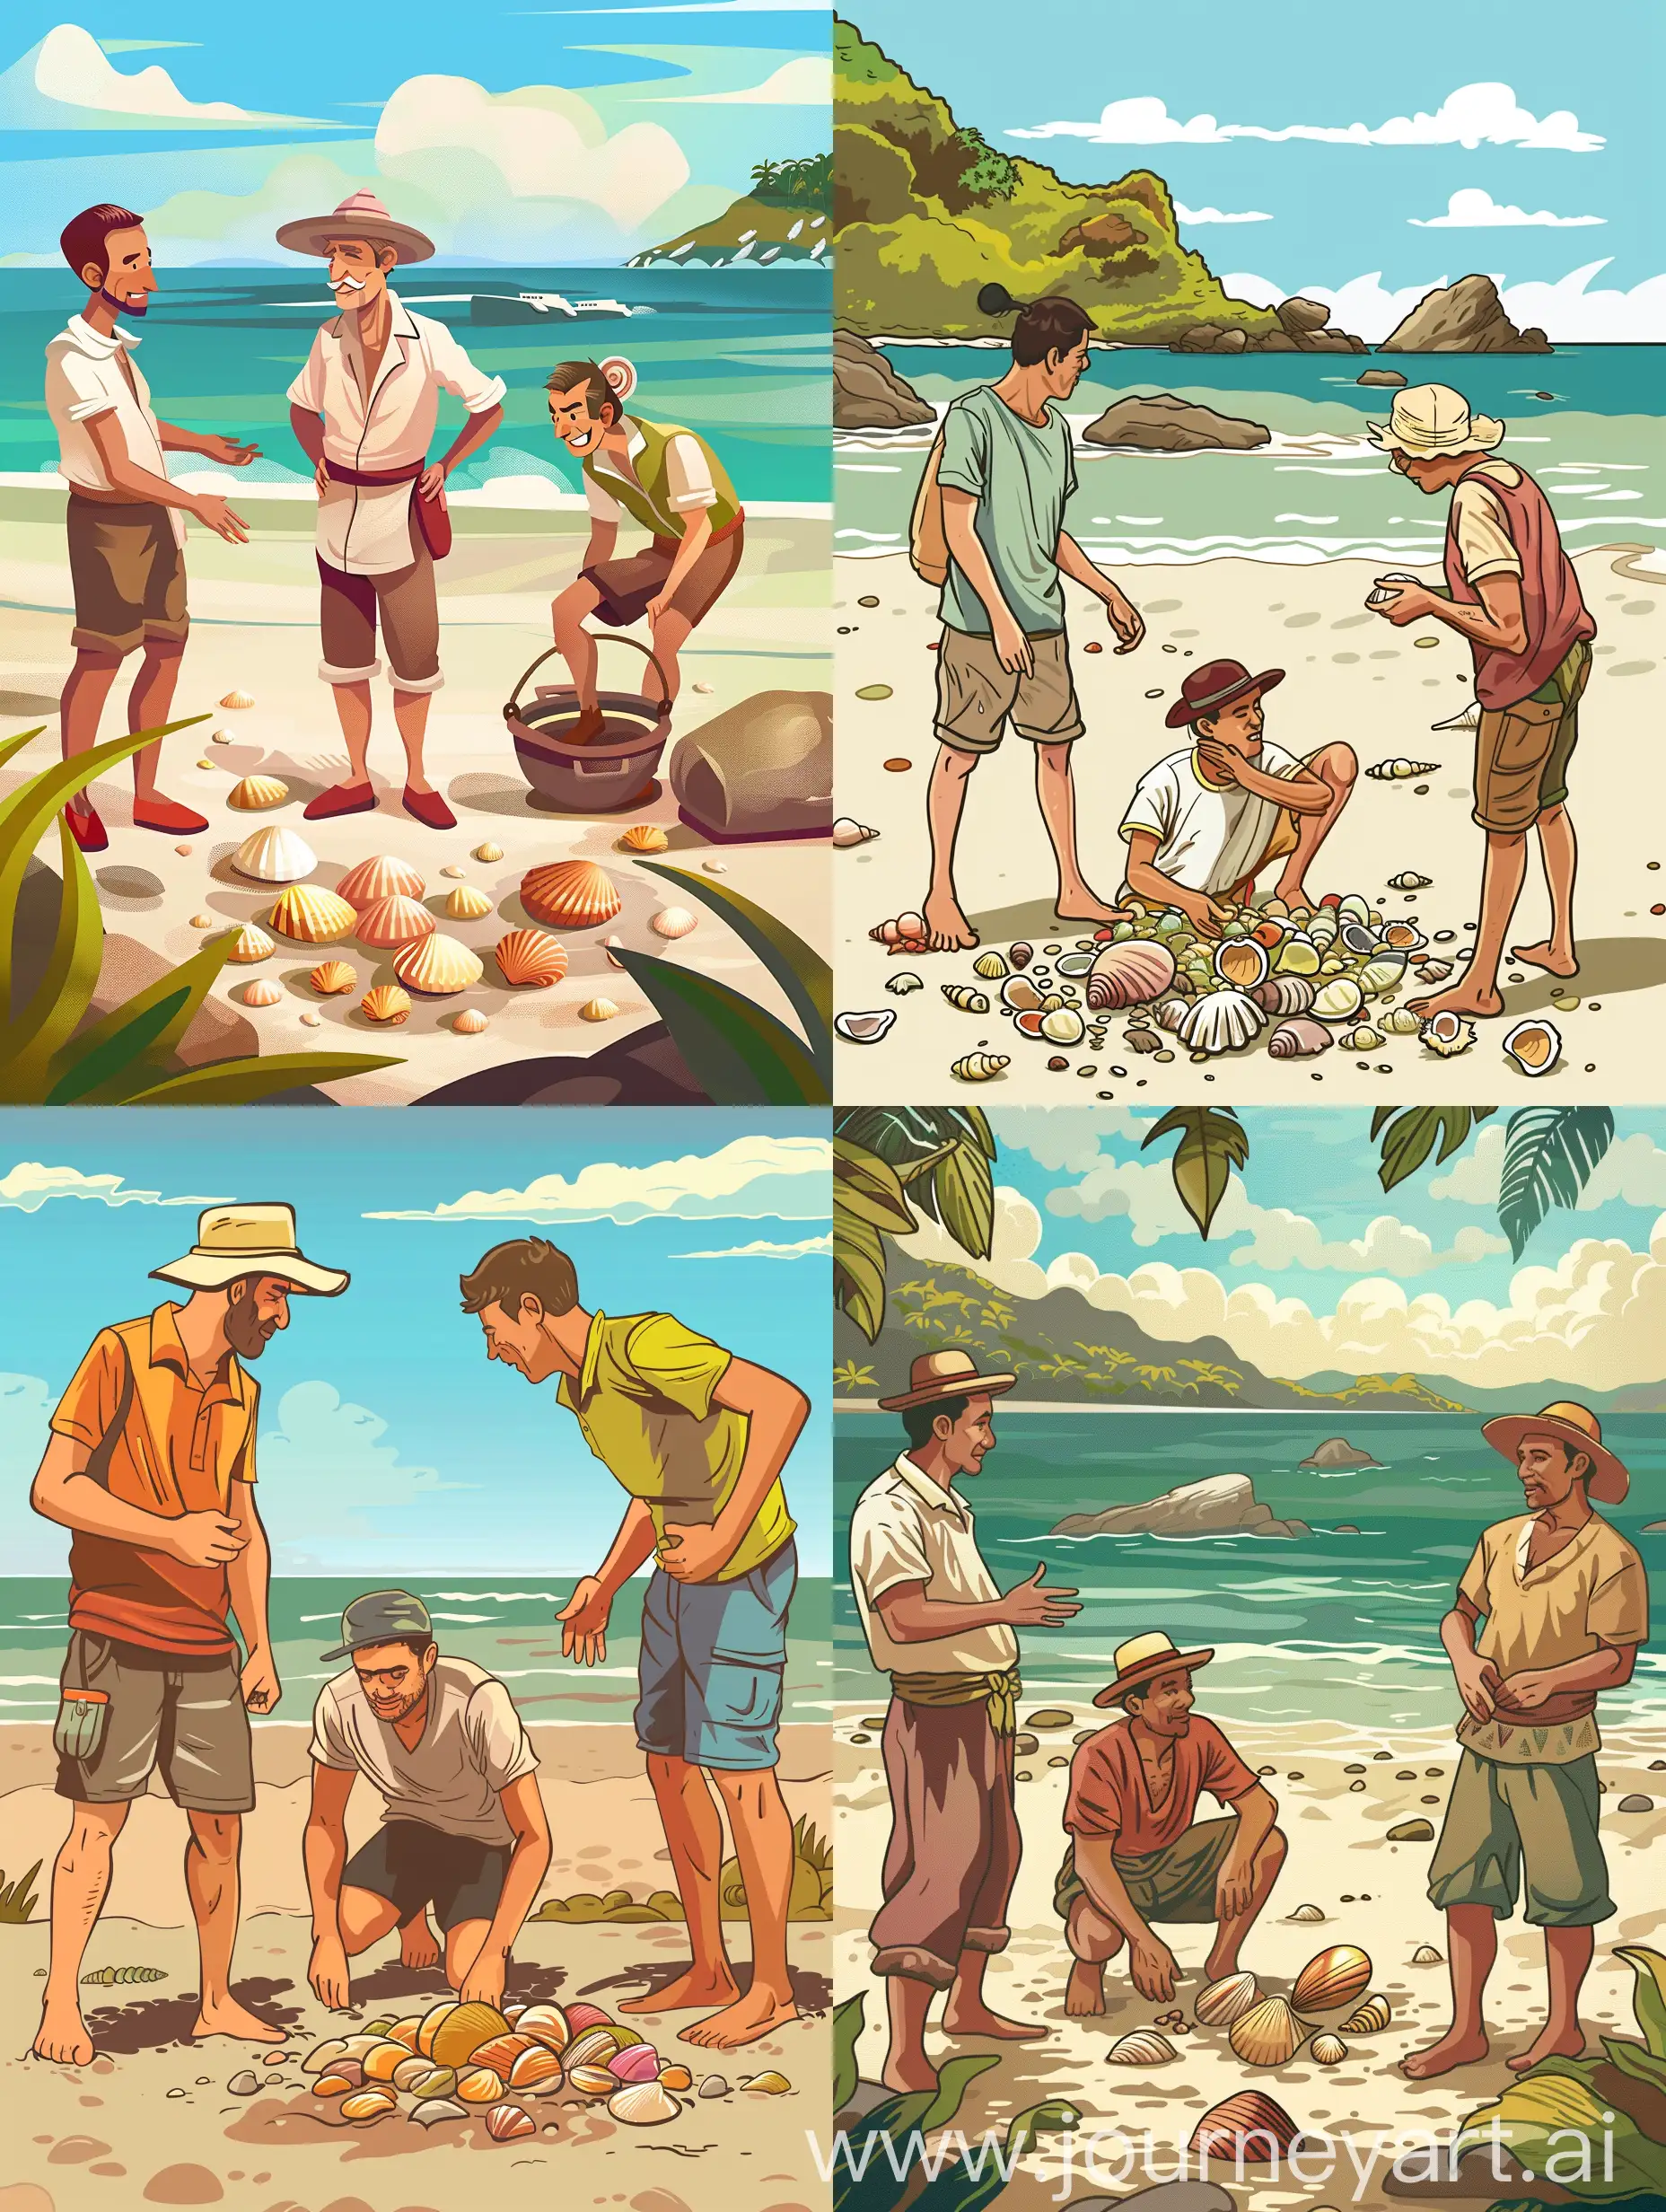 Spaniards-and-Locals-Conversing-on-Beach-Philippines-Cartoon-Vector